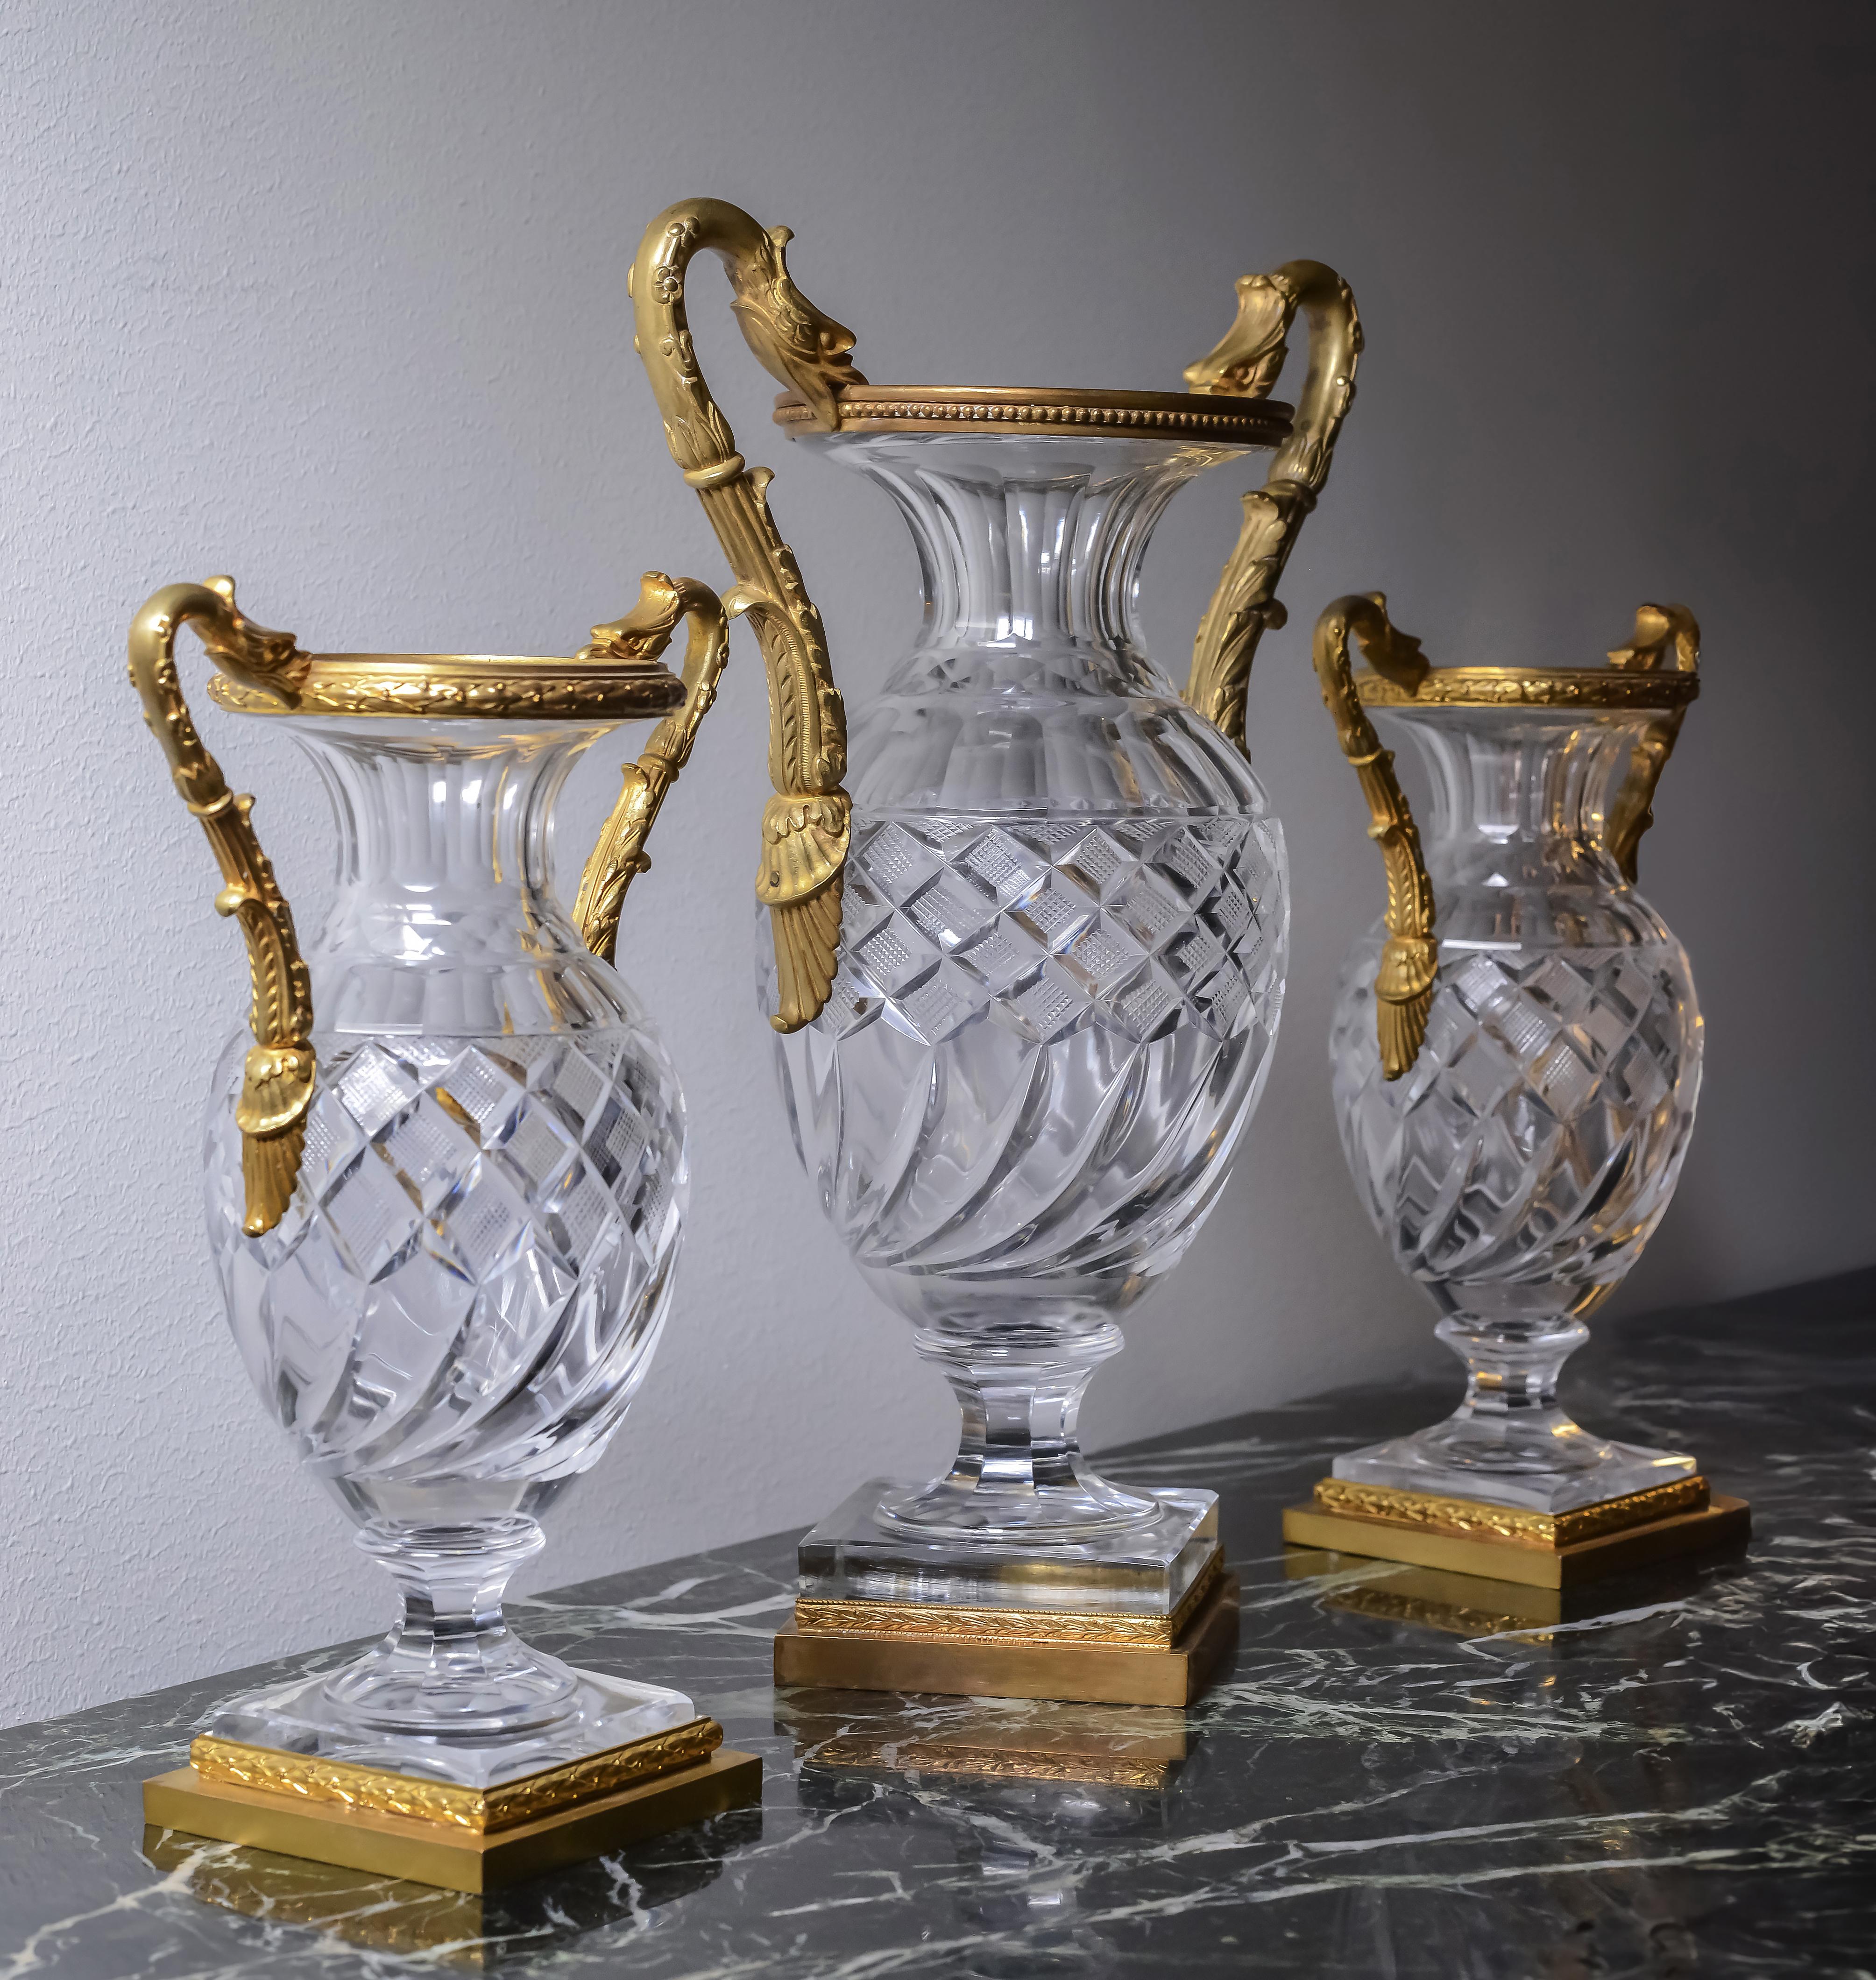 Baccarat Empire Cut Crystal Glass Vases w Gilt Bronze Griffon Heads 19th century In Good Condition For Sale In Sweden, SE